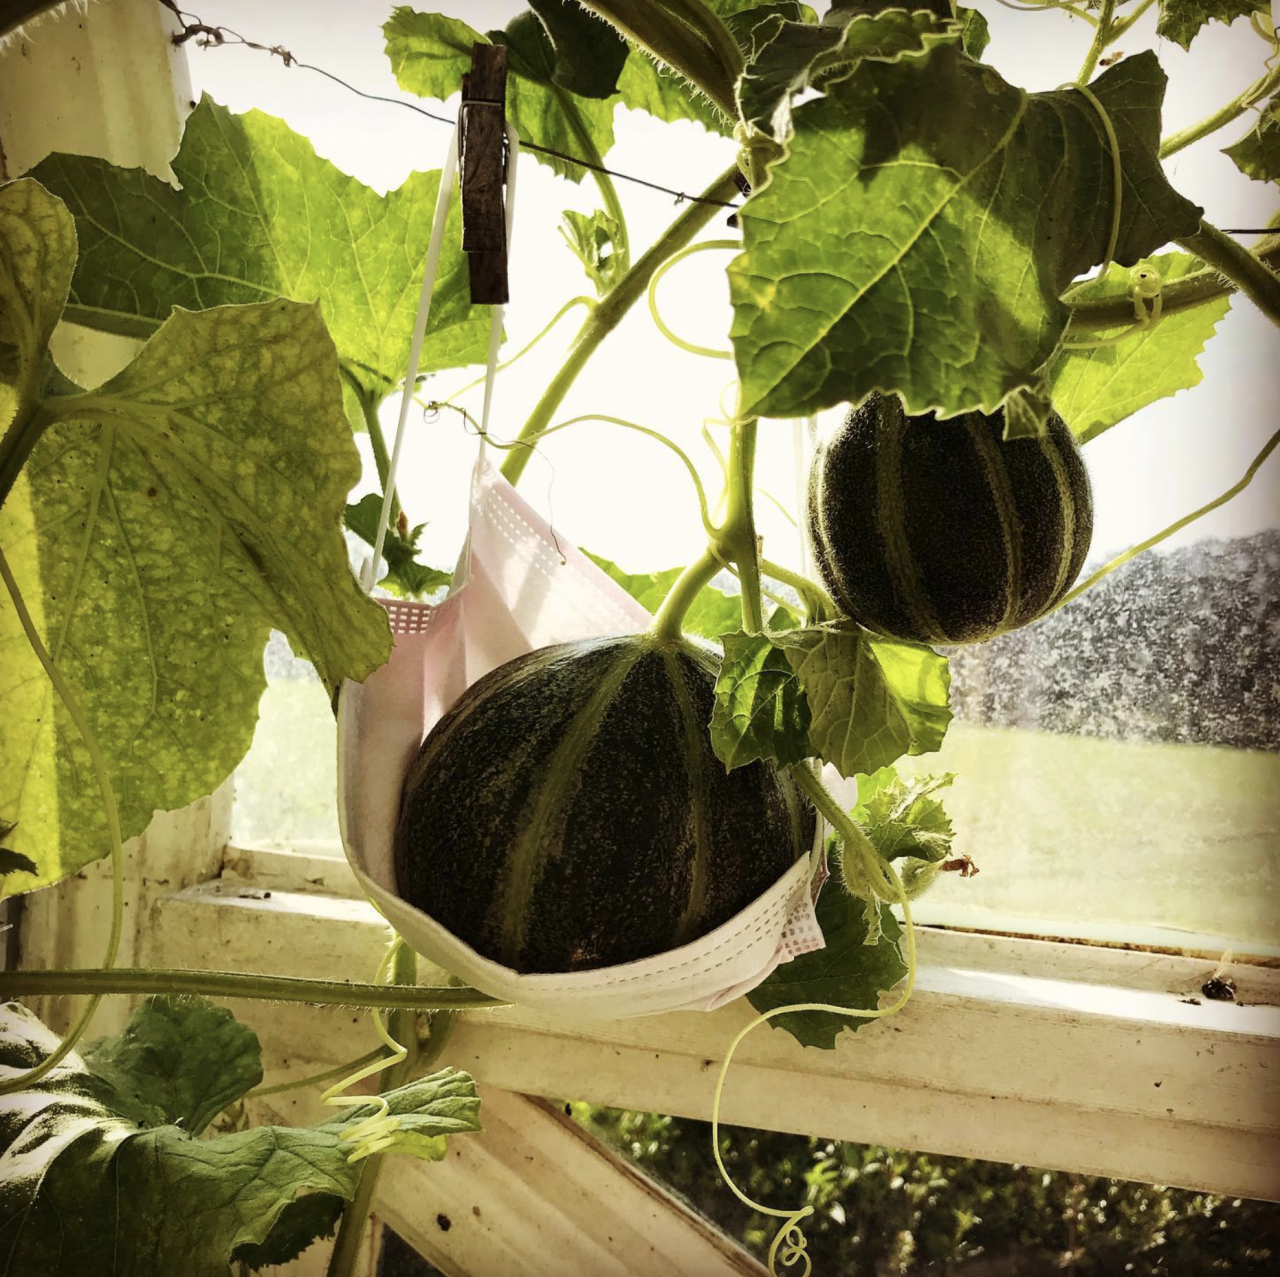 Ever wondered what to do with all those used disposable medical masks? Here’s an idea - use them as hammocks for heavy hanging fruit in your garden. This comfy fruit is a Ogen Melon (Cucumis melo reticulatus), an heirloom variety of muskmelon...